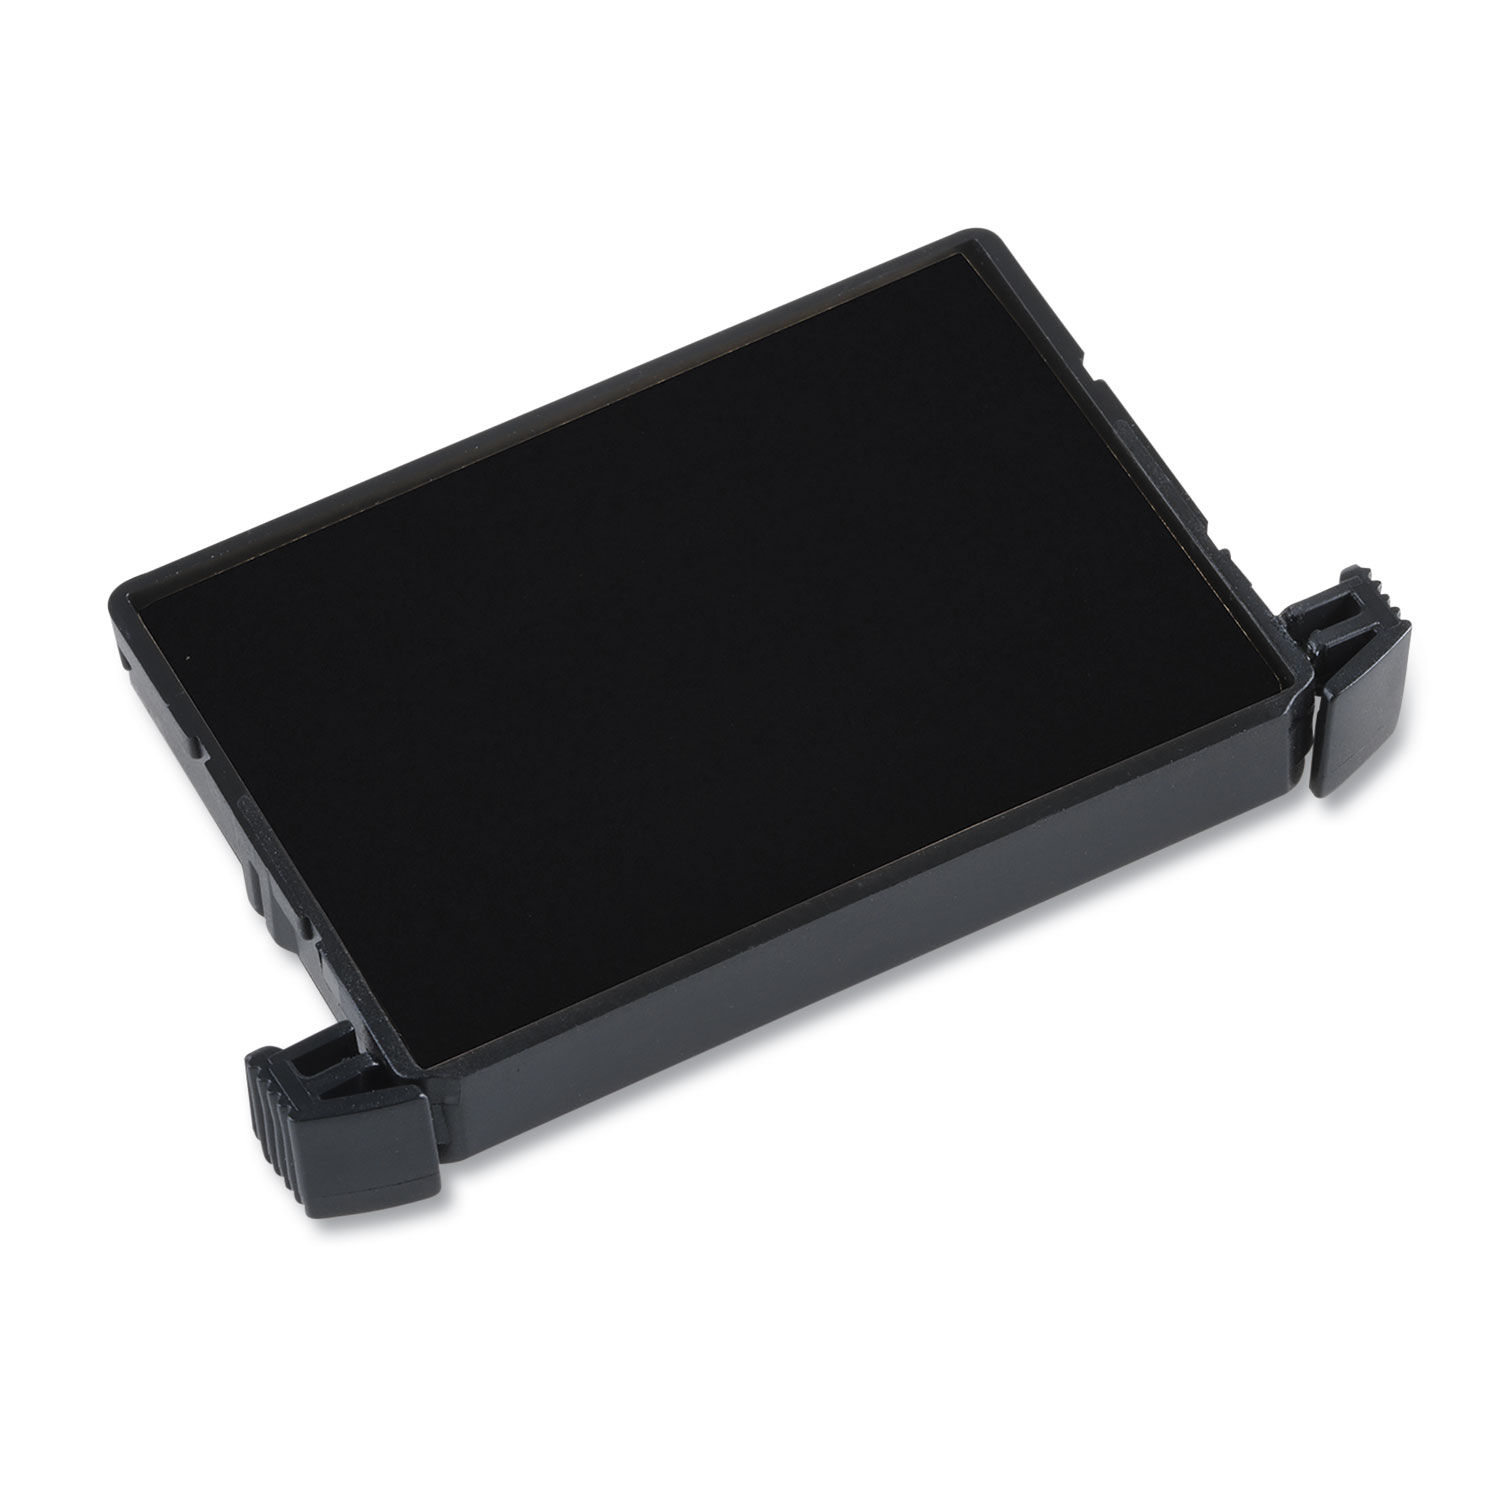 E4750 Printy Replacement Pad for Trodat Self-Inking Stamps 1" x 1.63", Black